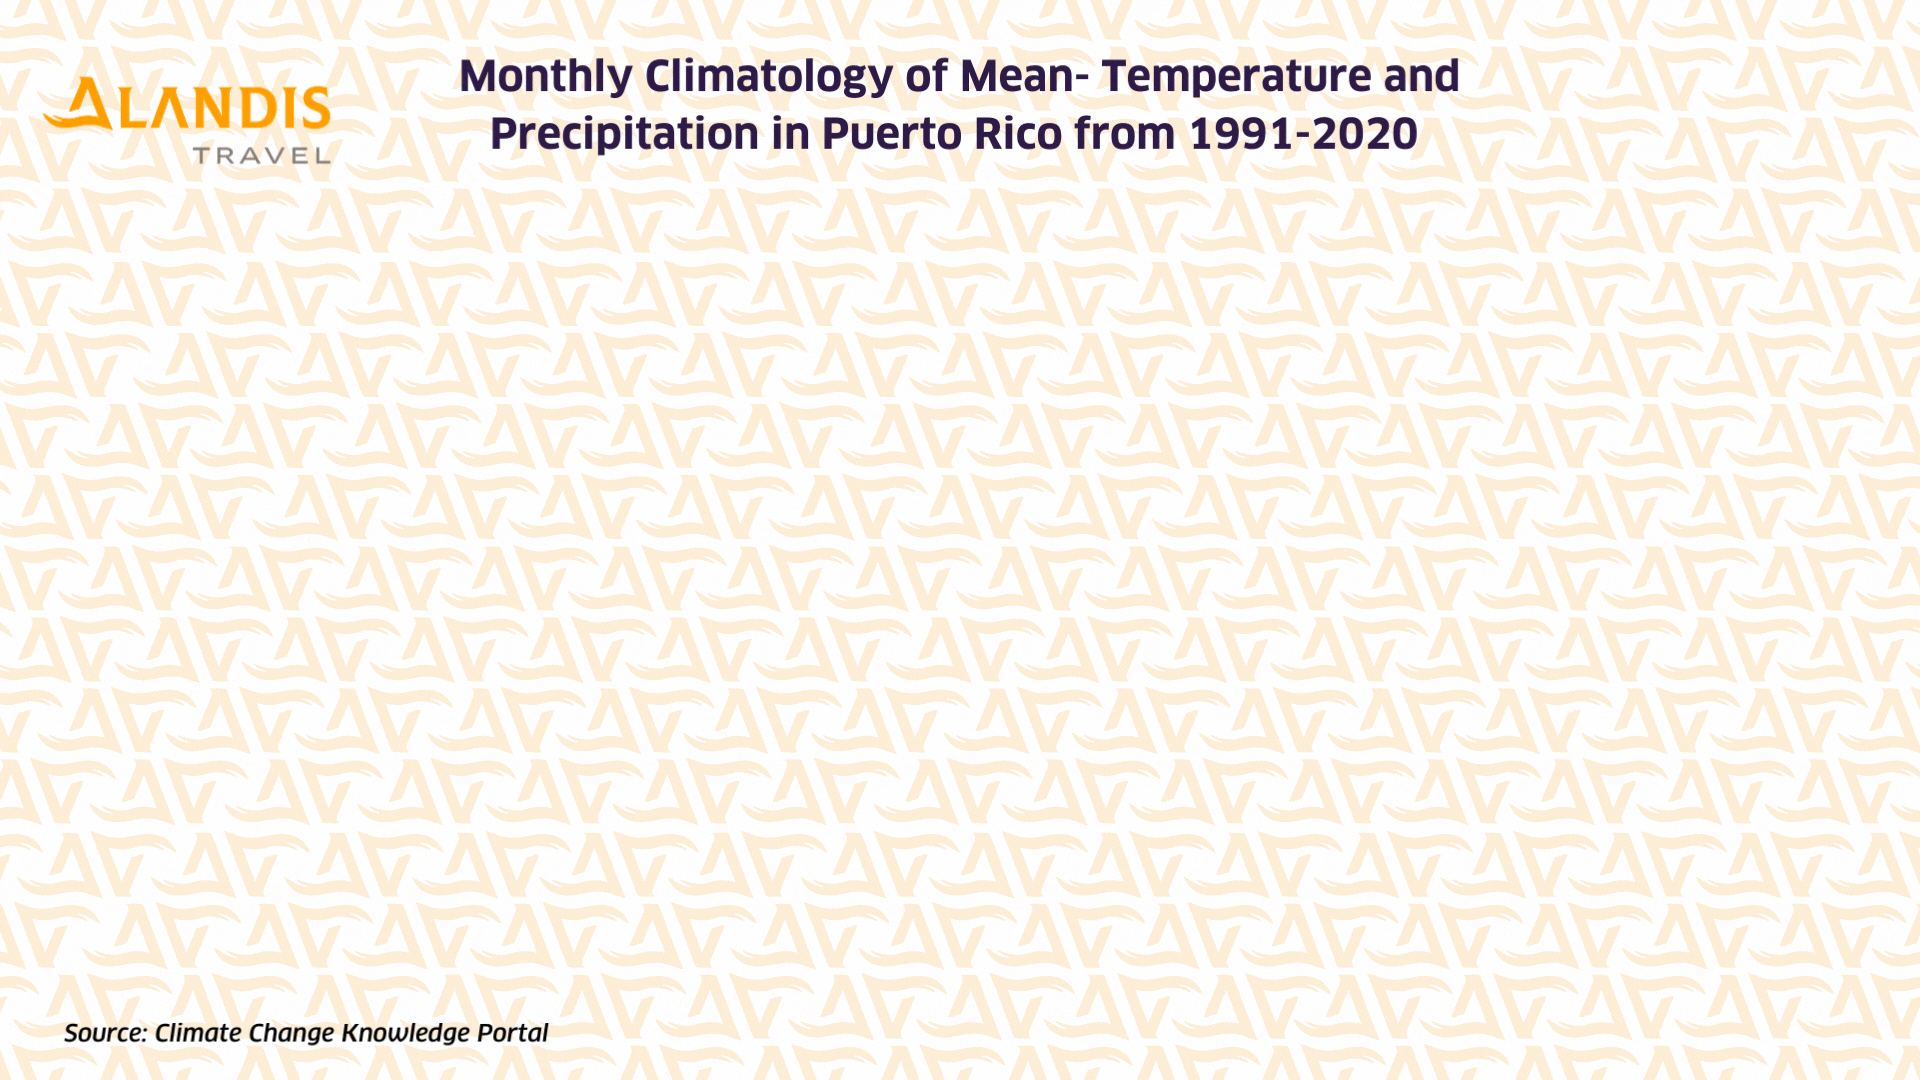 Monthly climatology of mean temperature and precipitation in Puerto Rico from 1991-2020